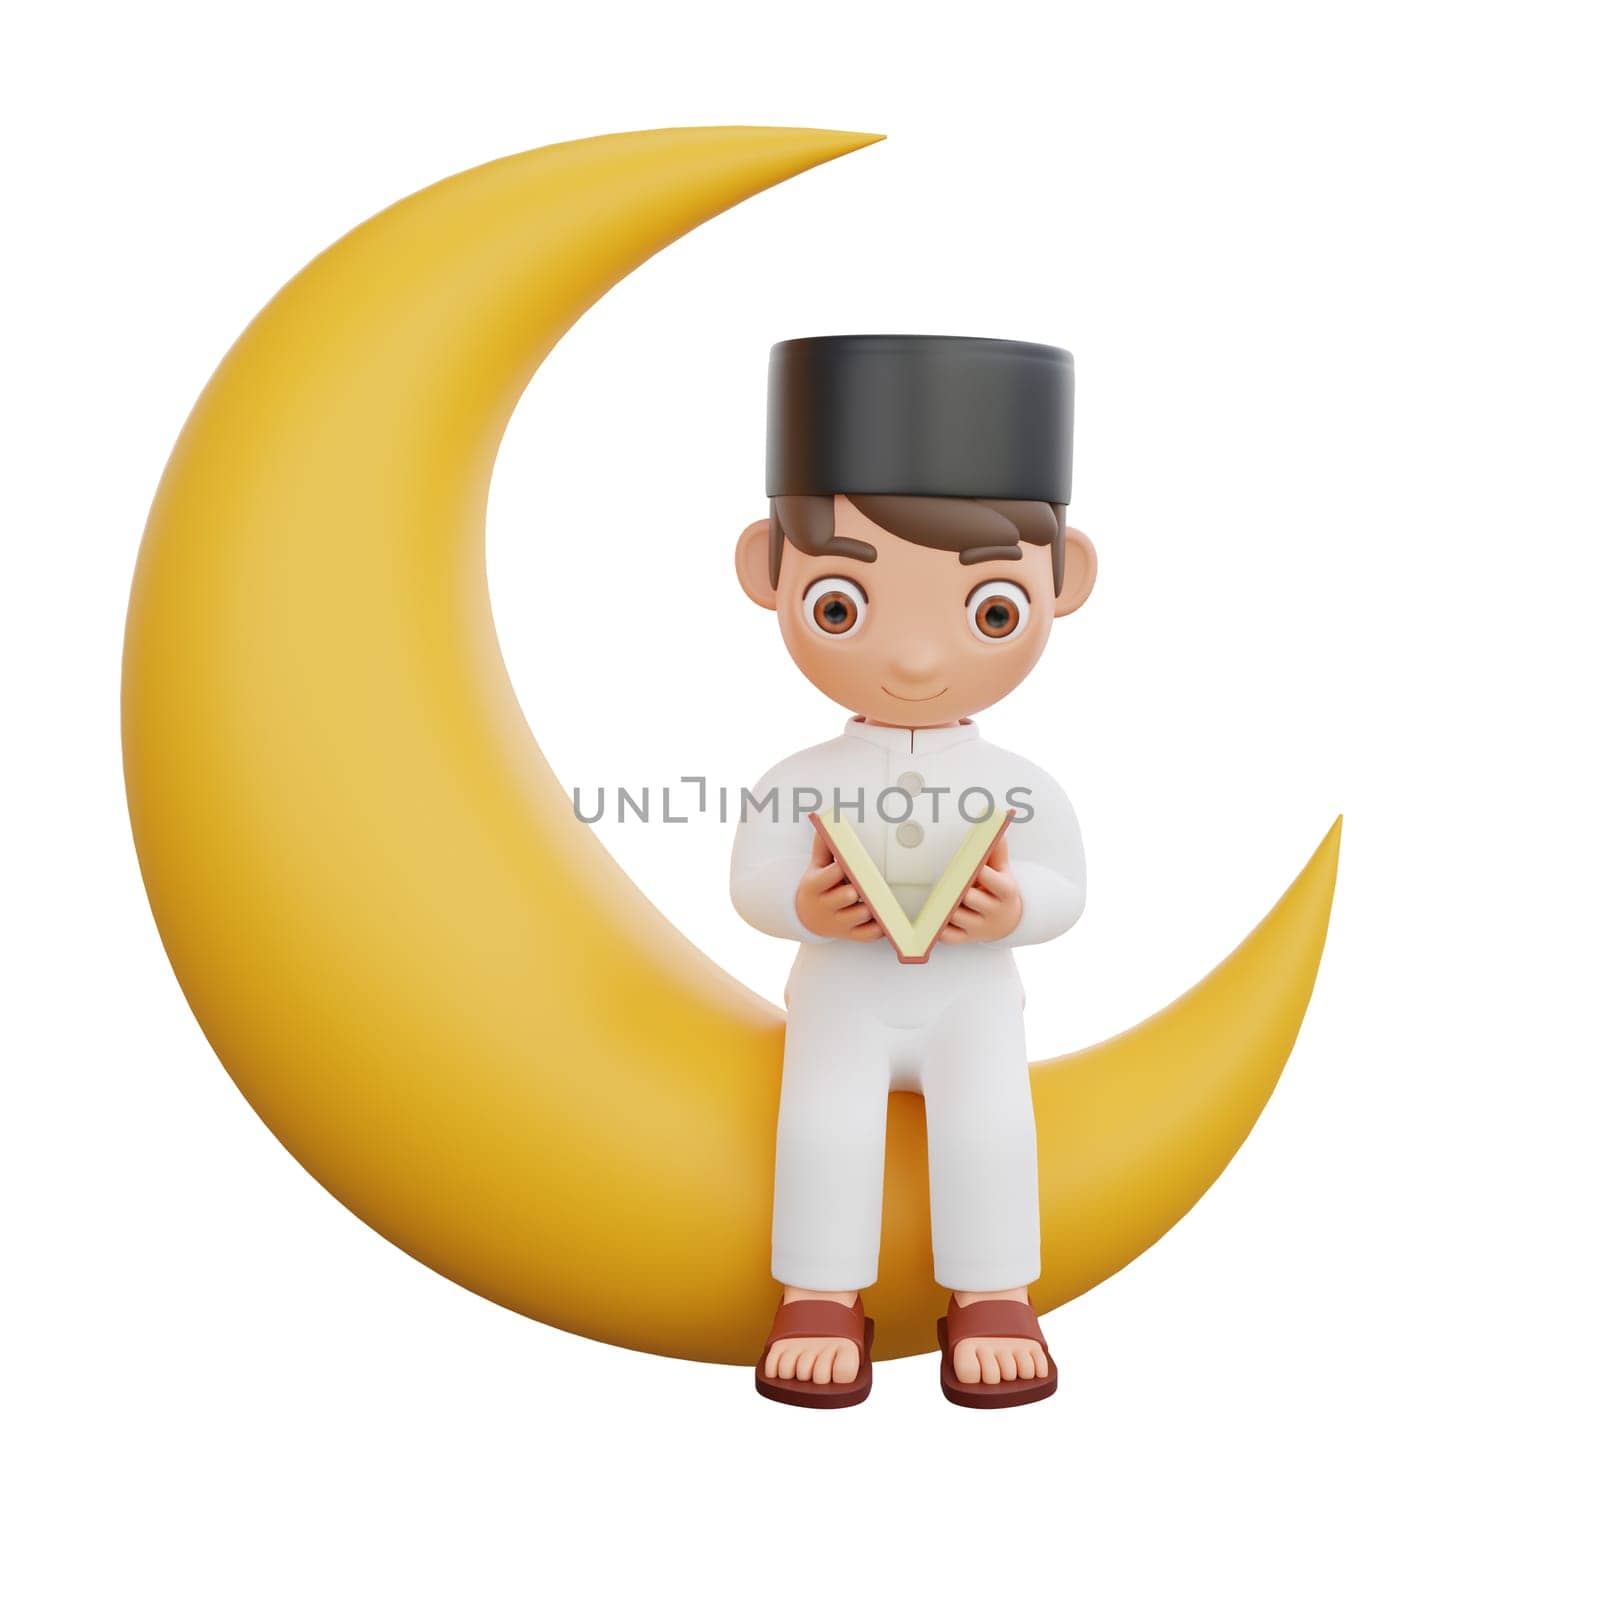 3D Illustration of Muslim character reading the Quran sitting on the crescent moon by Rahmat_Djayusman